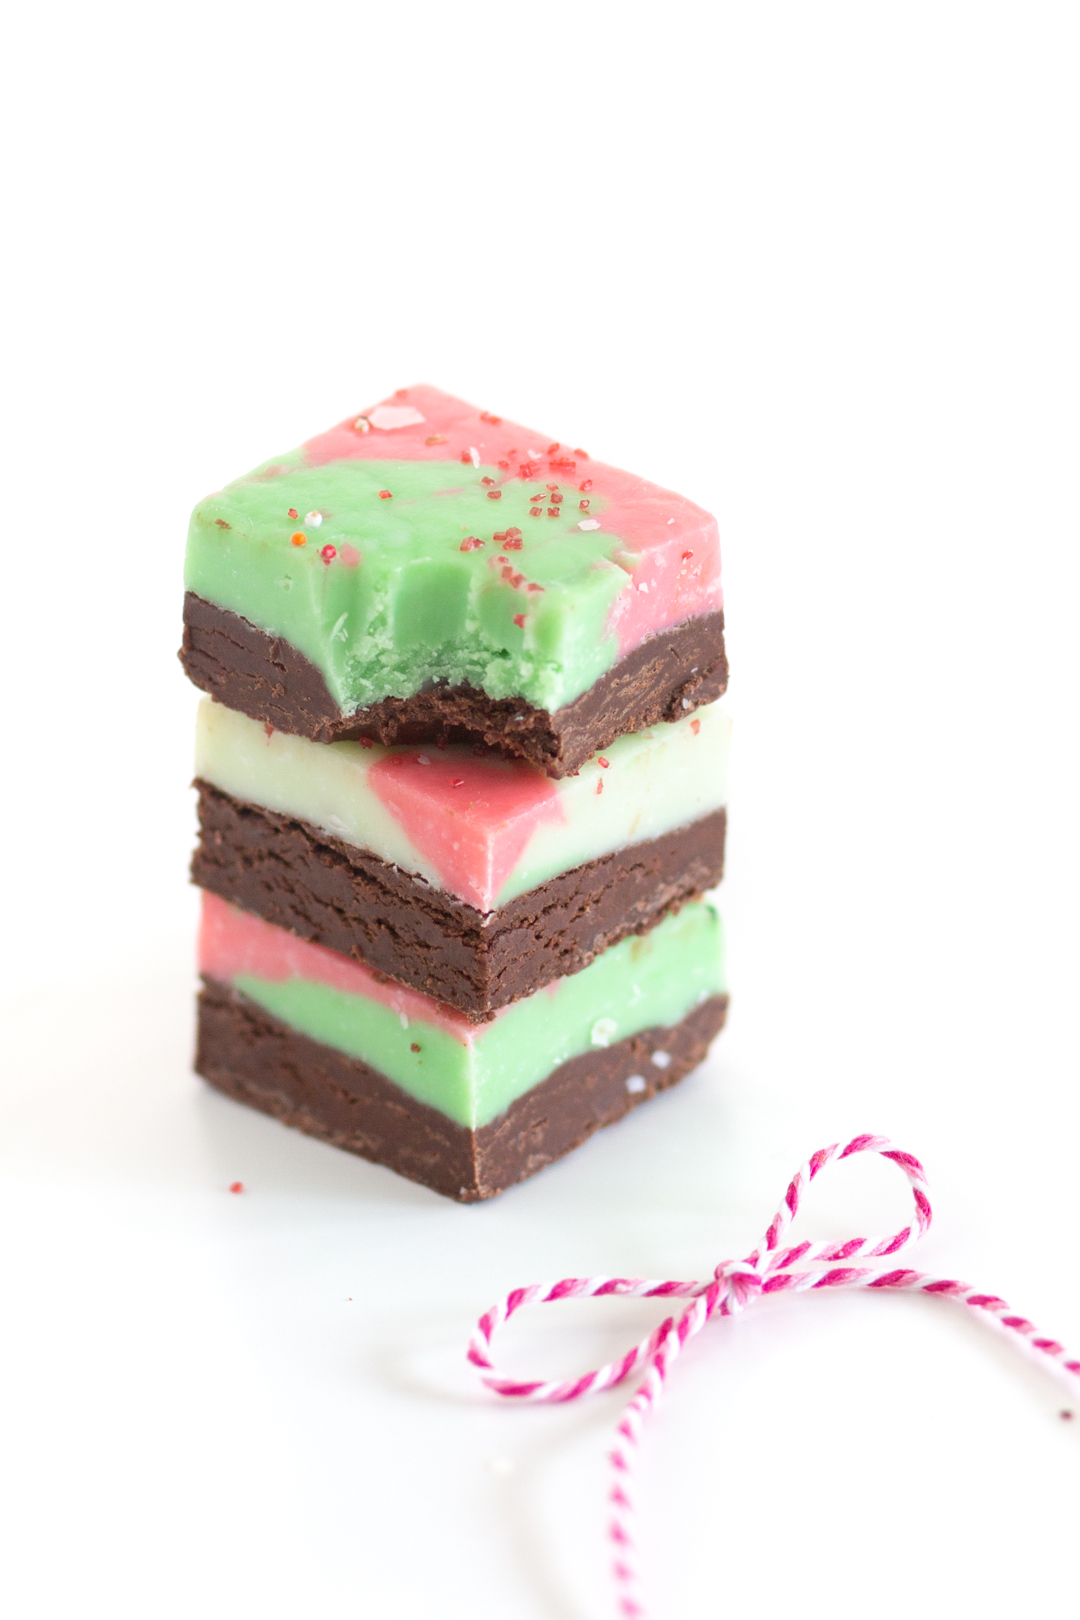 stack of two-layer christmas themed fudge. bottom layer brown chocolate, top layer white chocolate with red and green food coloring swirls, topped with sprinkles.